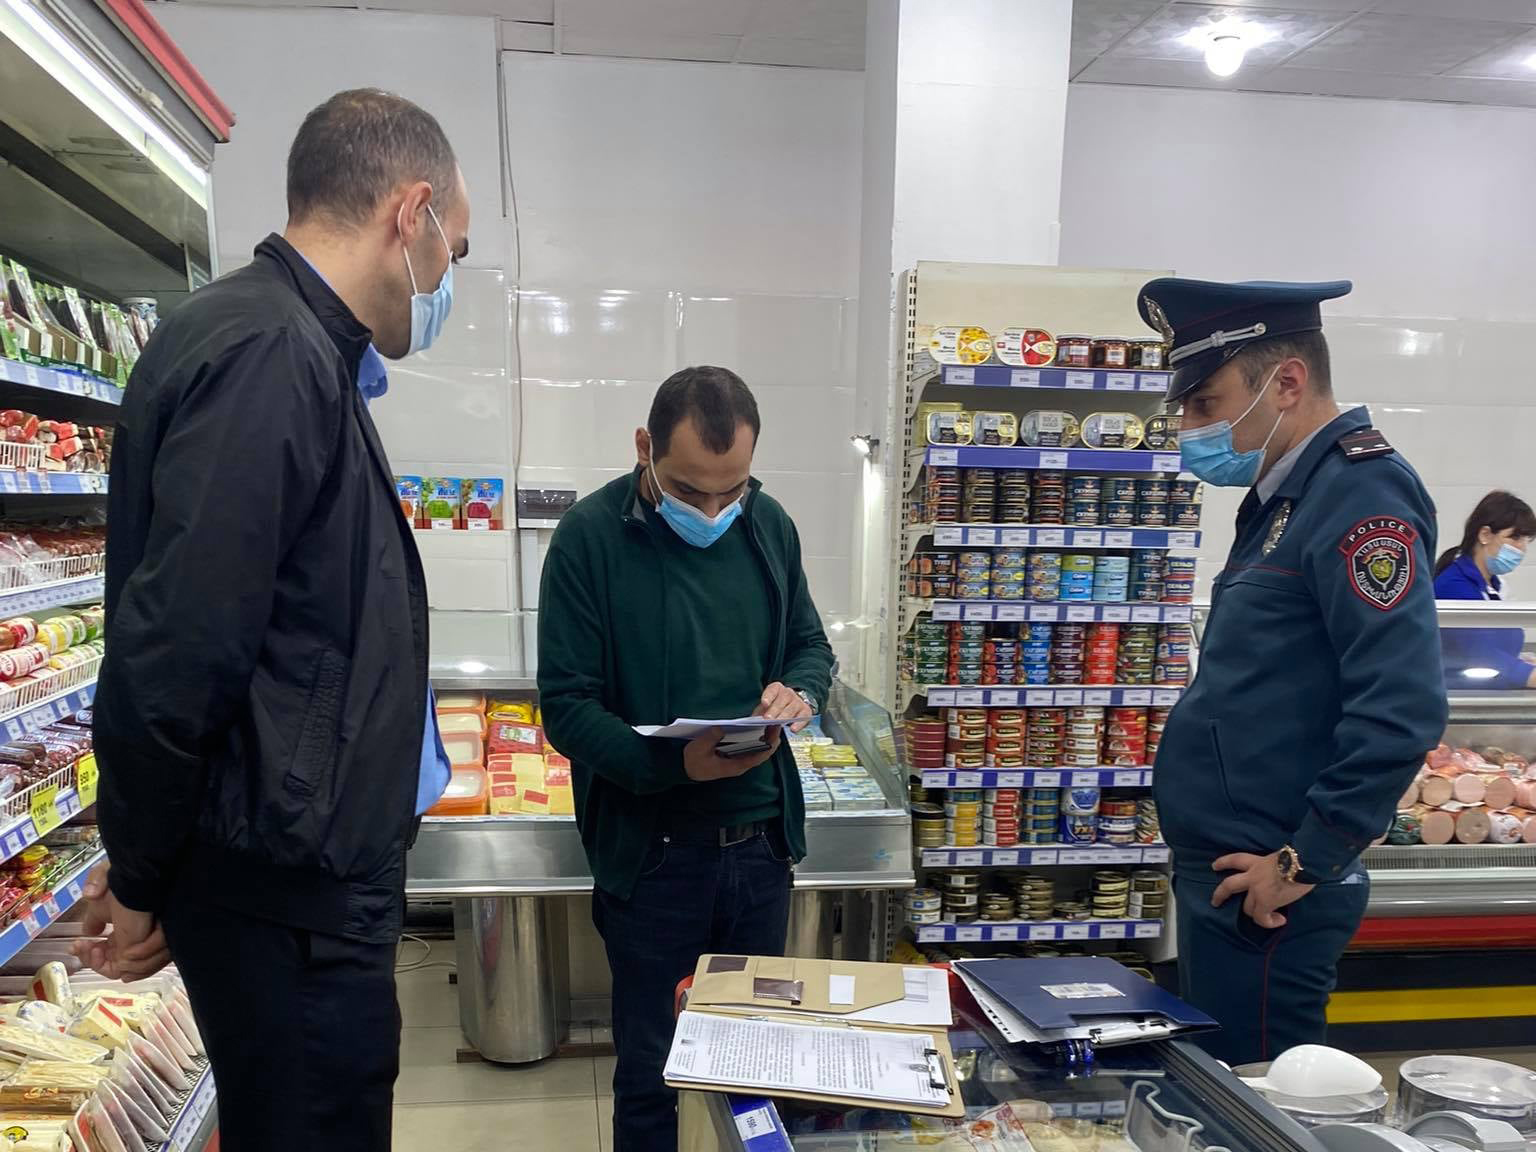 FSIB Inspectors of the Yerevan Center carried out large-scale inspections in the capital's major stores in the evening